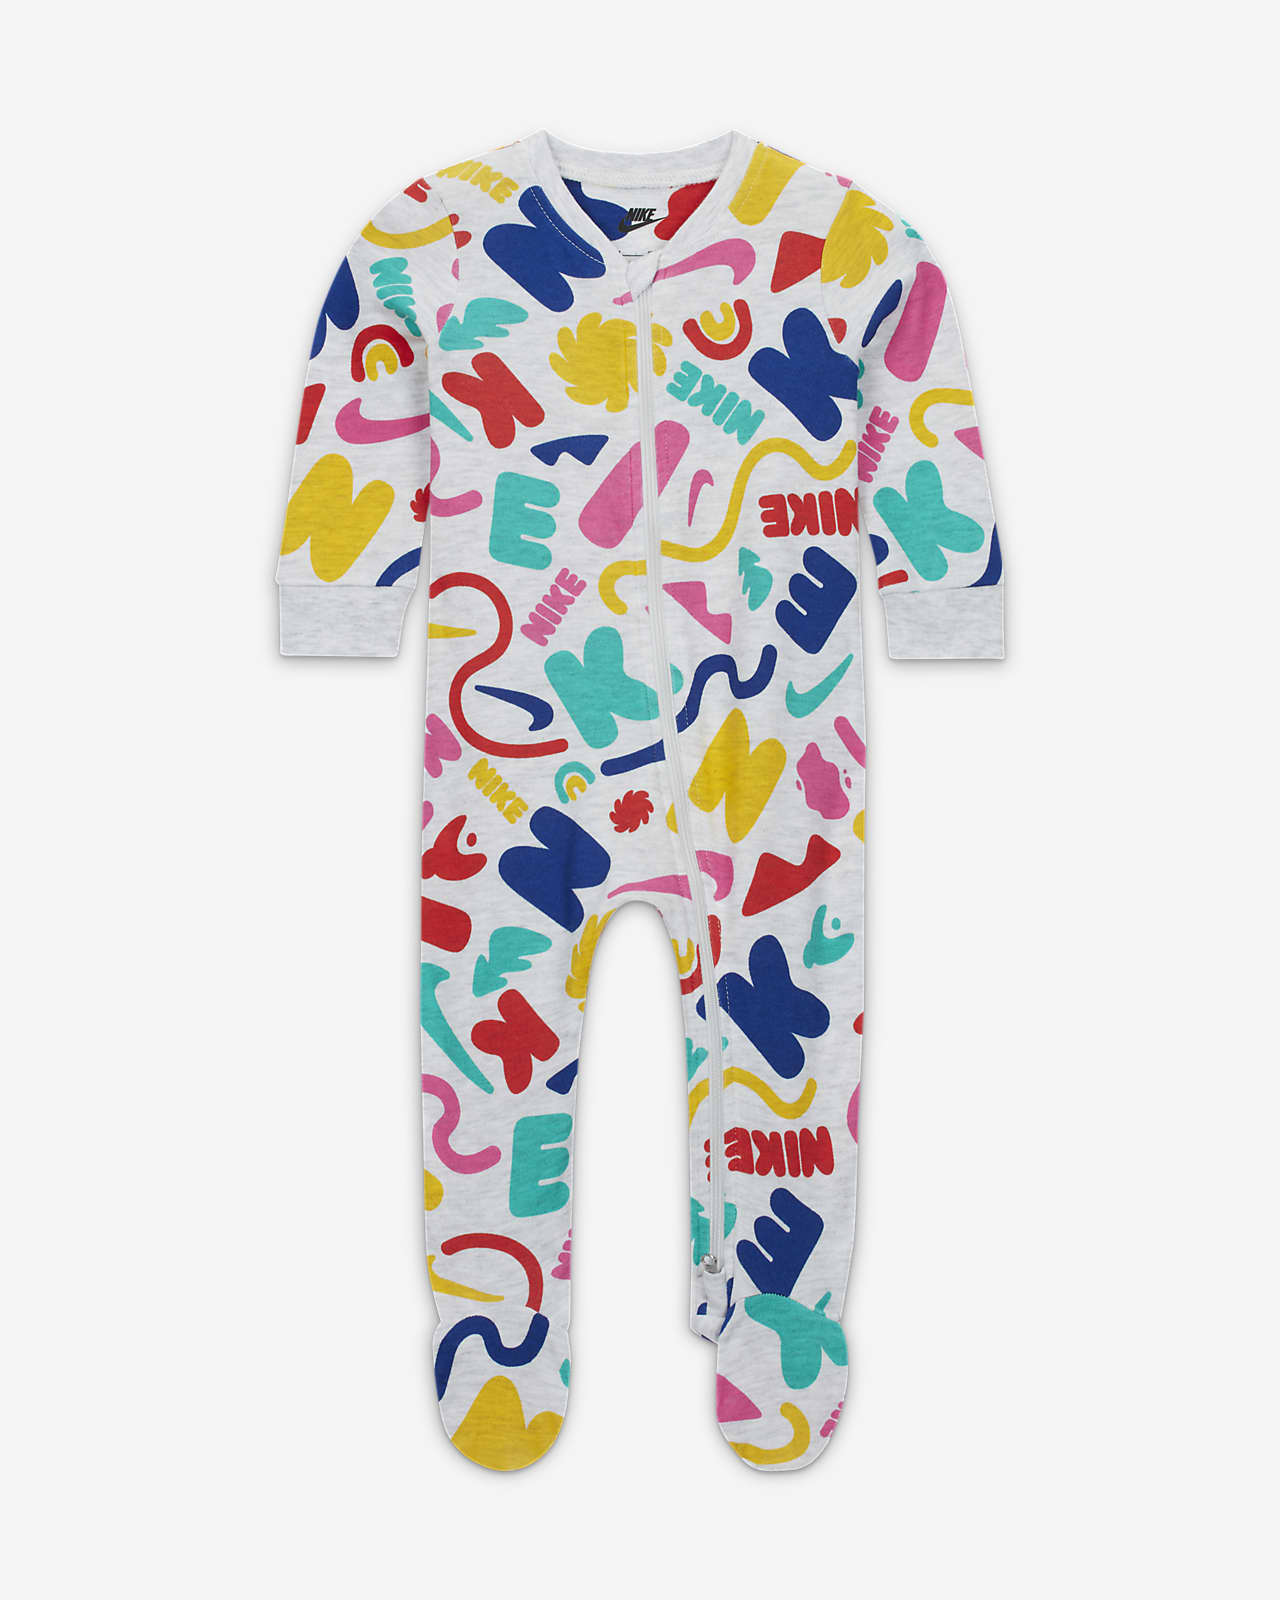 Nike Sportswear Primary Play Footed Overalls Baby Overalls